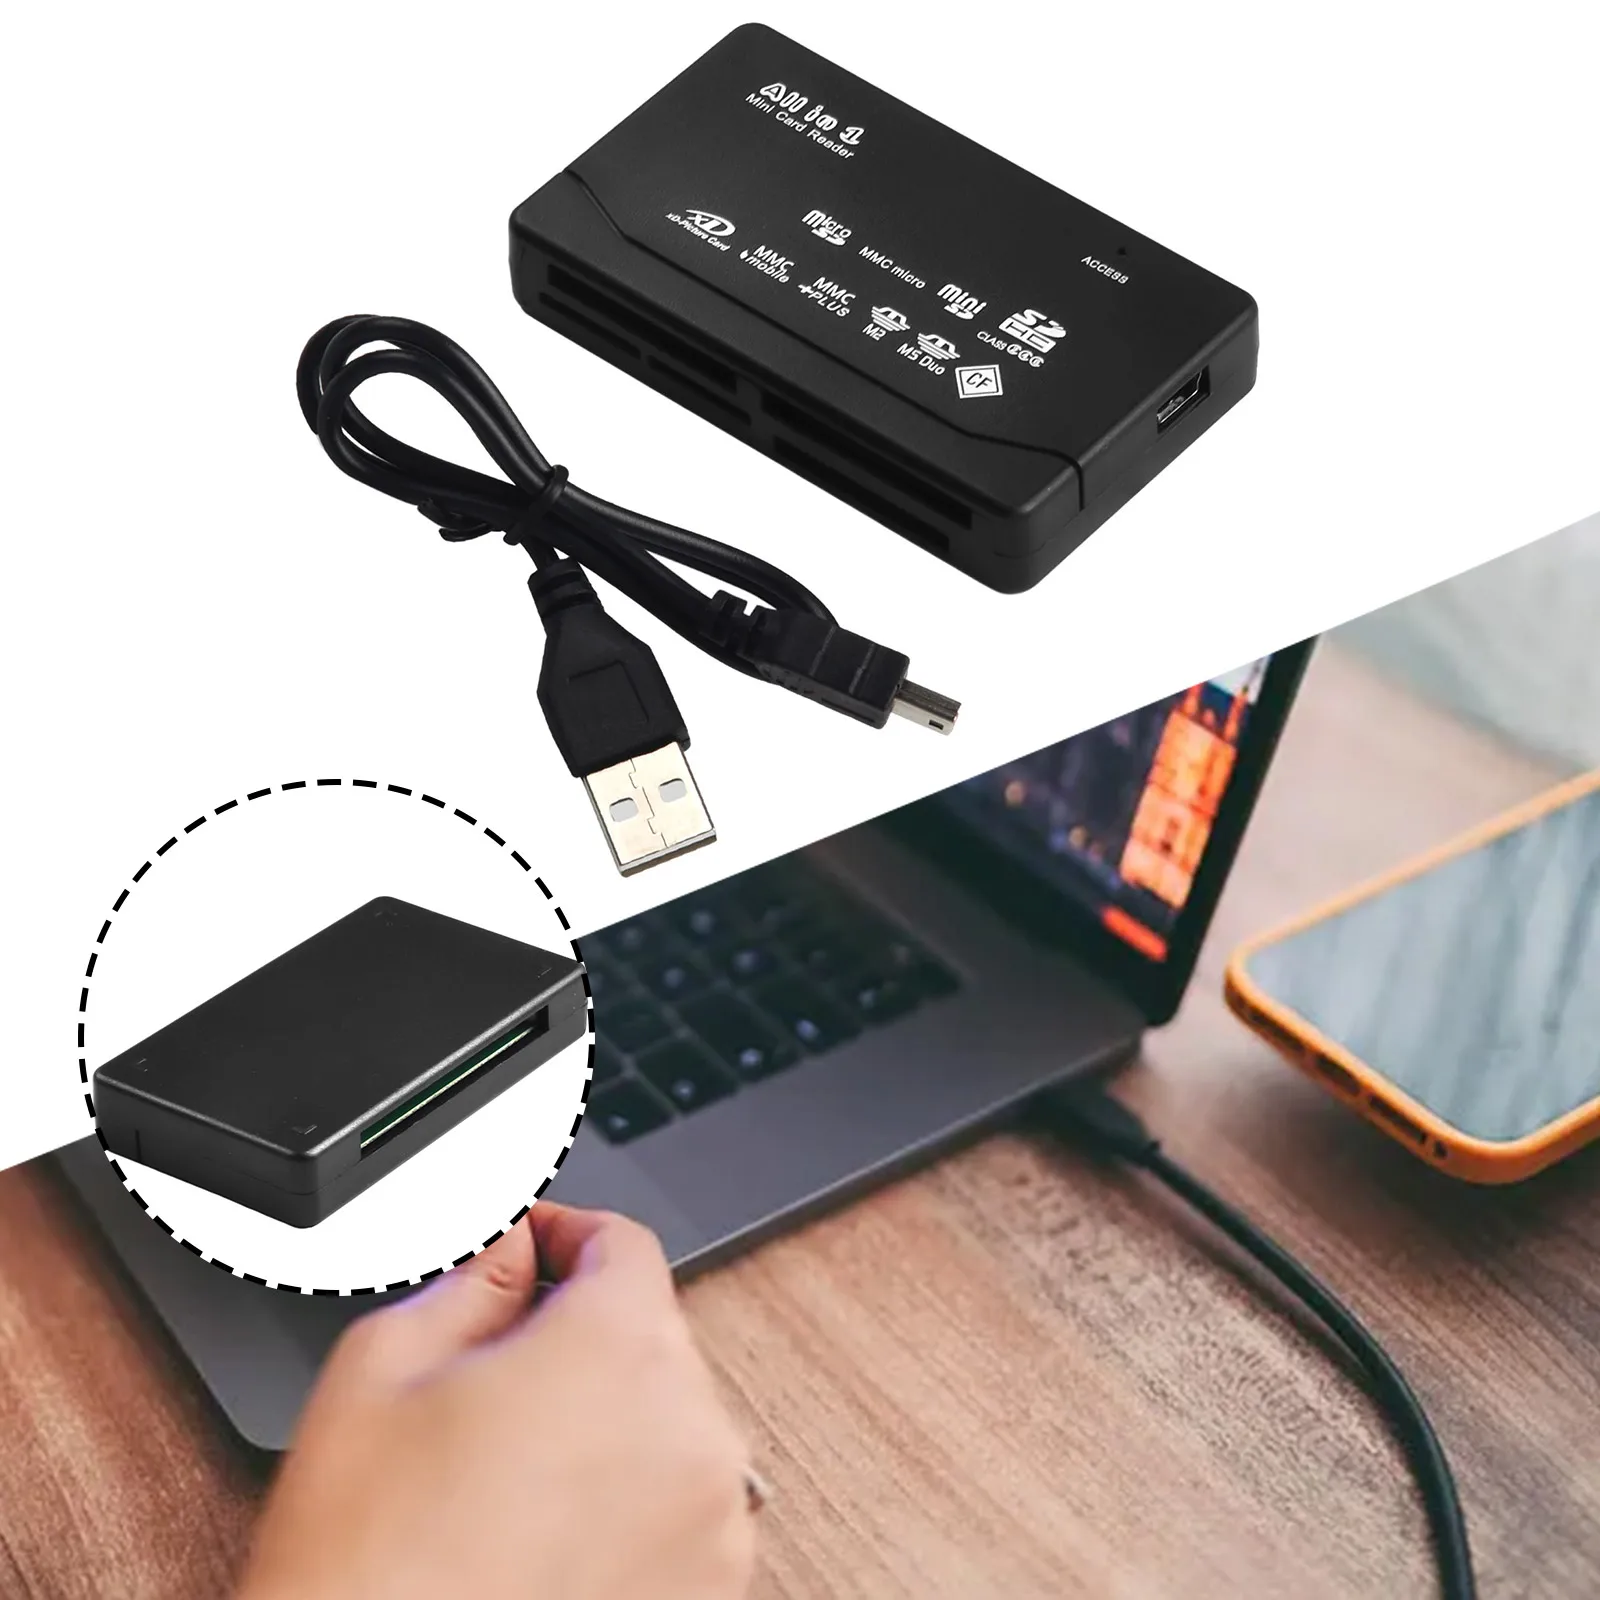 

Card Adapter Card Reader Memory Kit Part Accessory Tool Up to 480 Mb USB 2.0 TF High Quality Brand New Portable